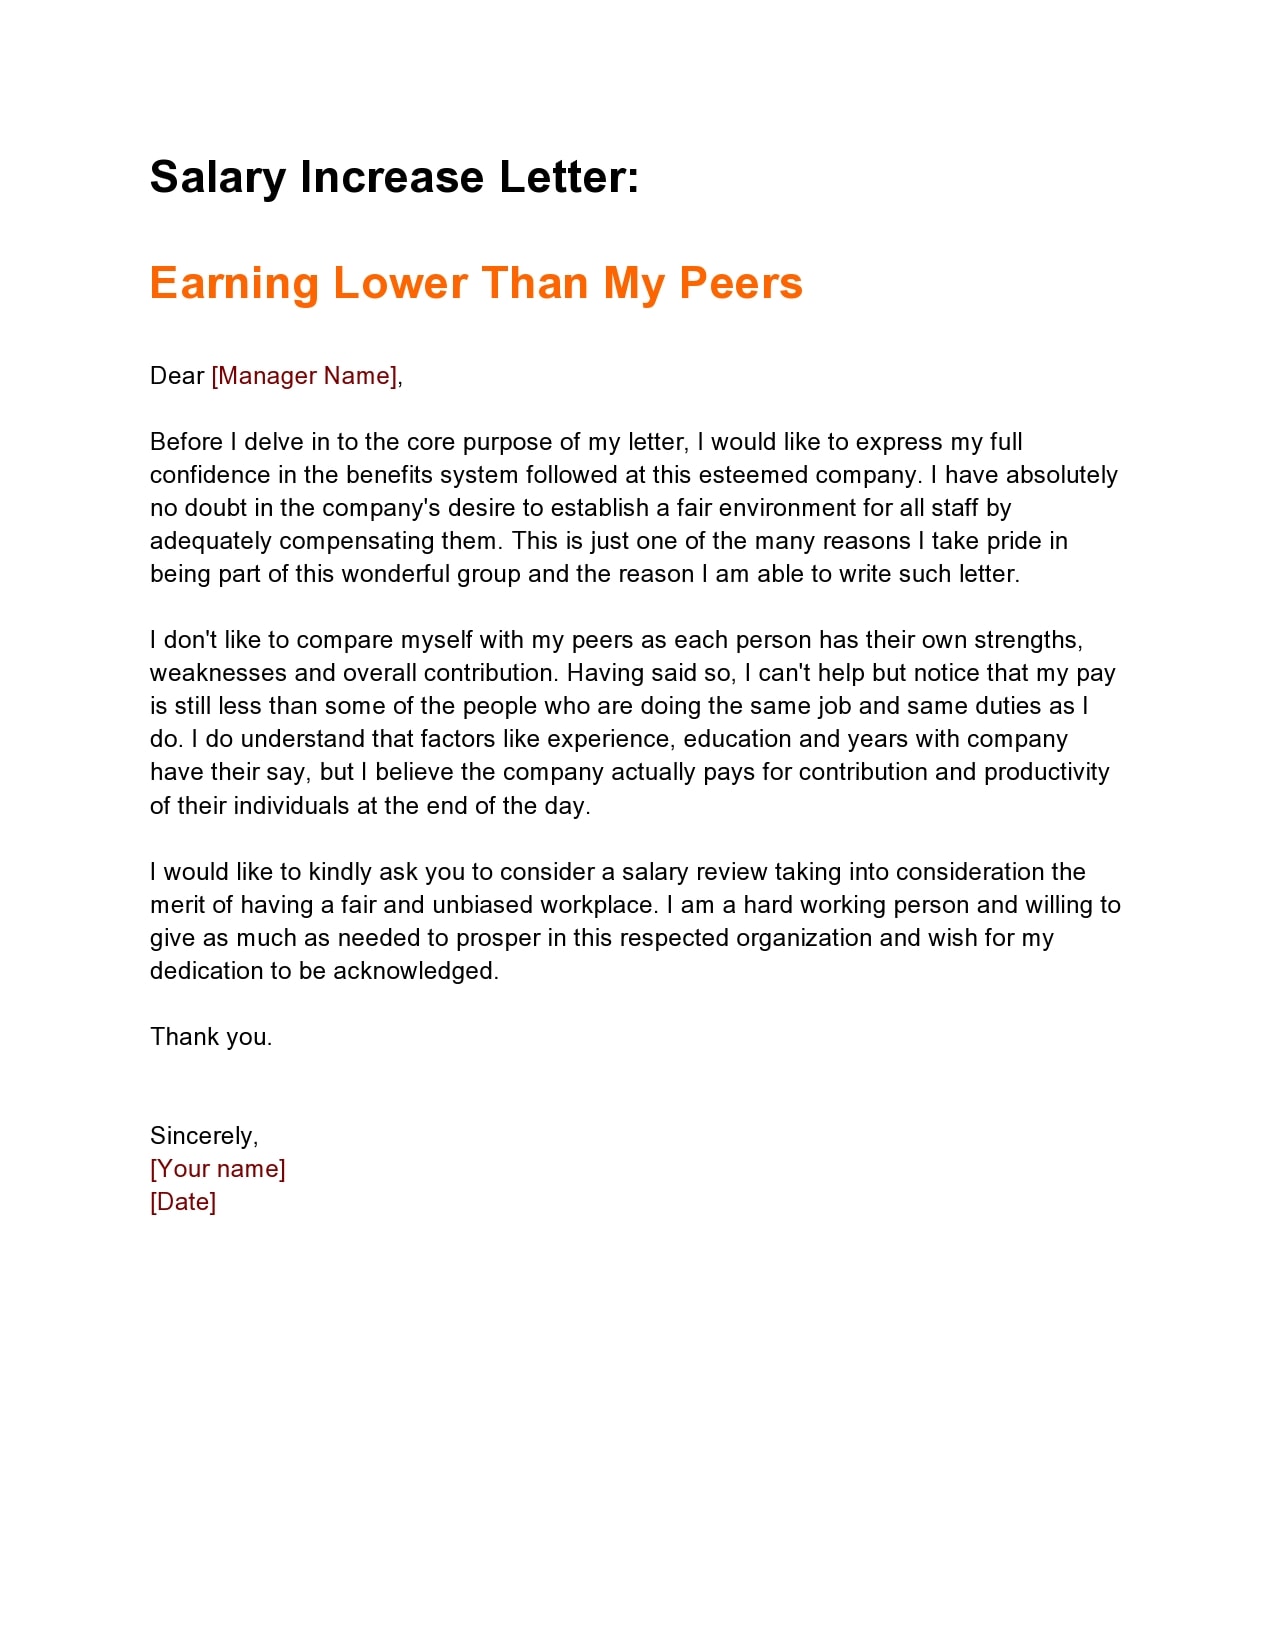 22 Effective Salary Increase Letters & Samples - TemplateArchive